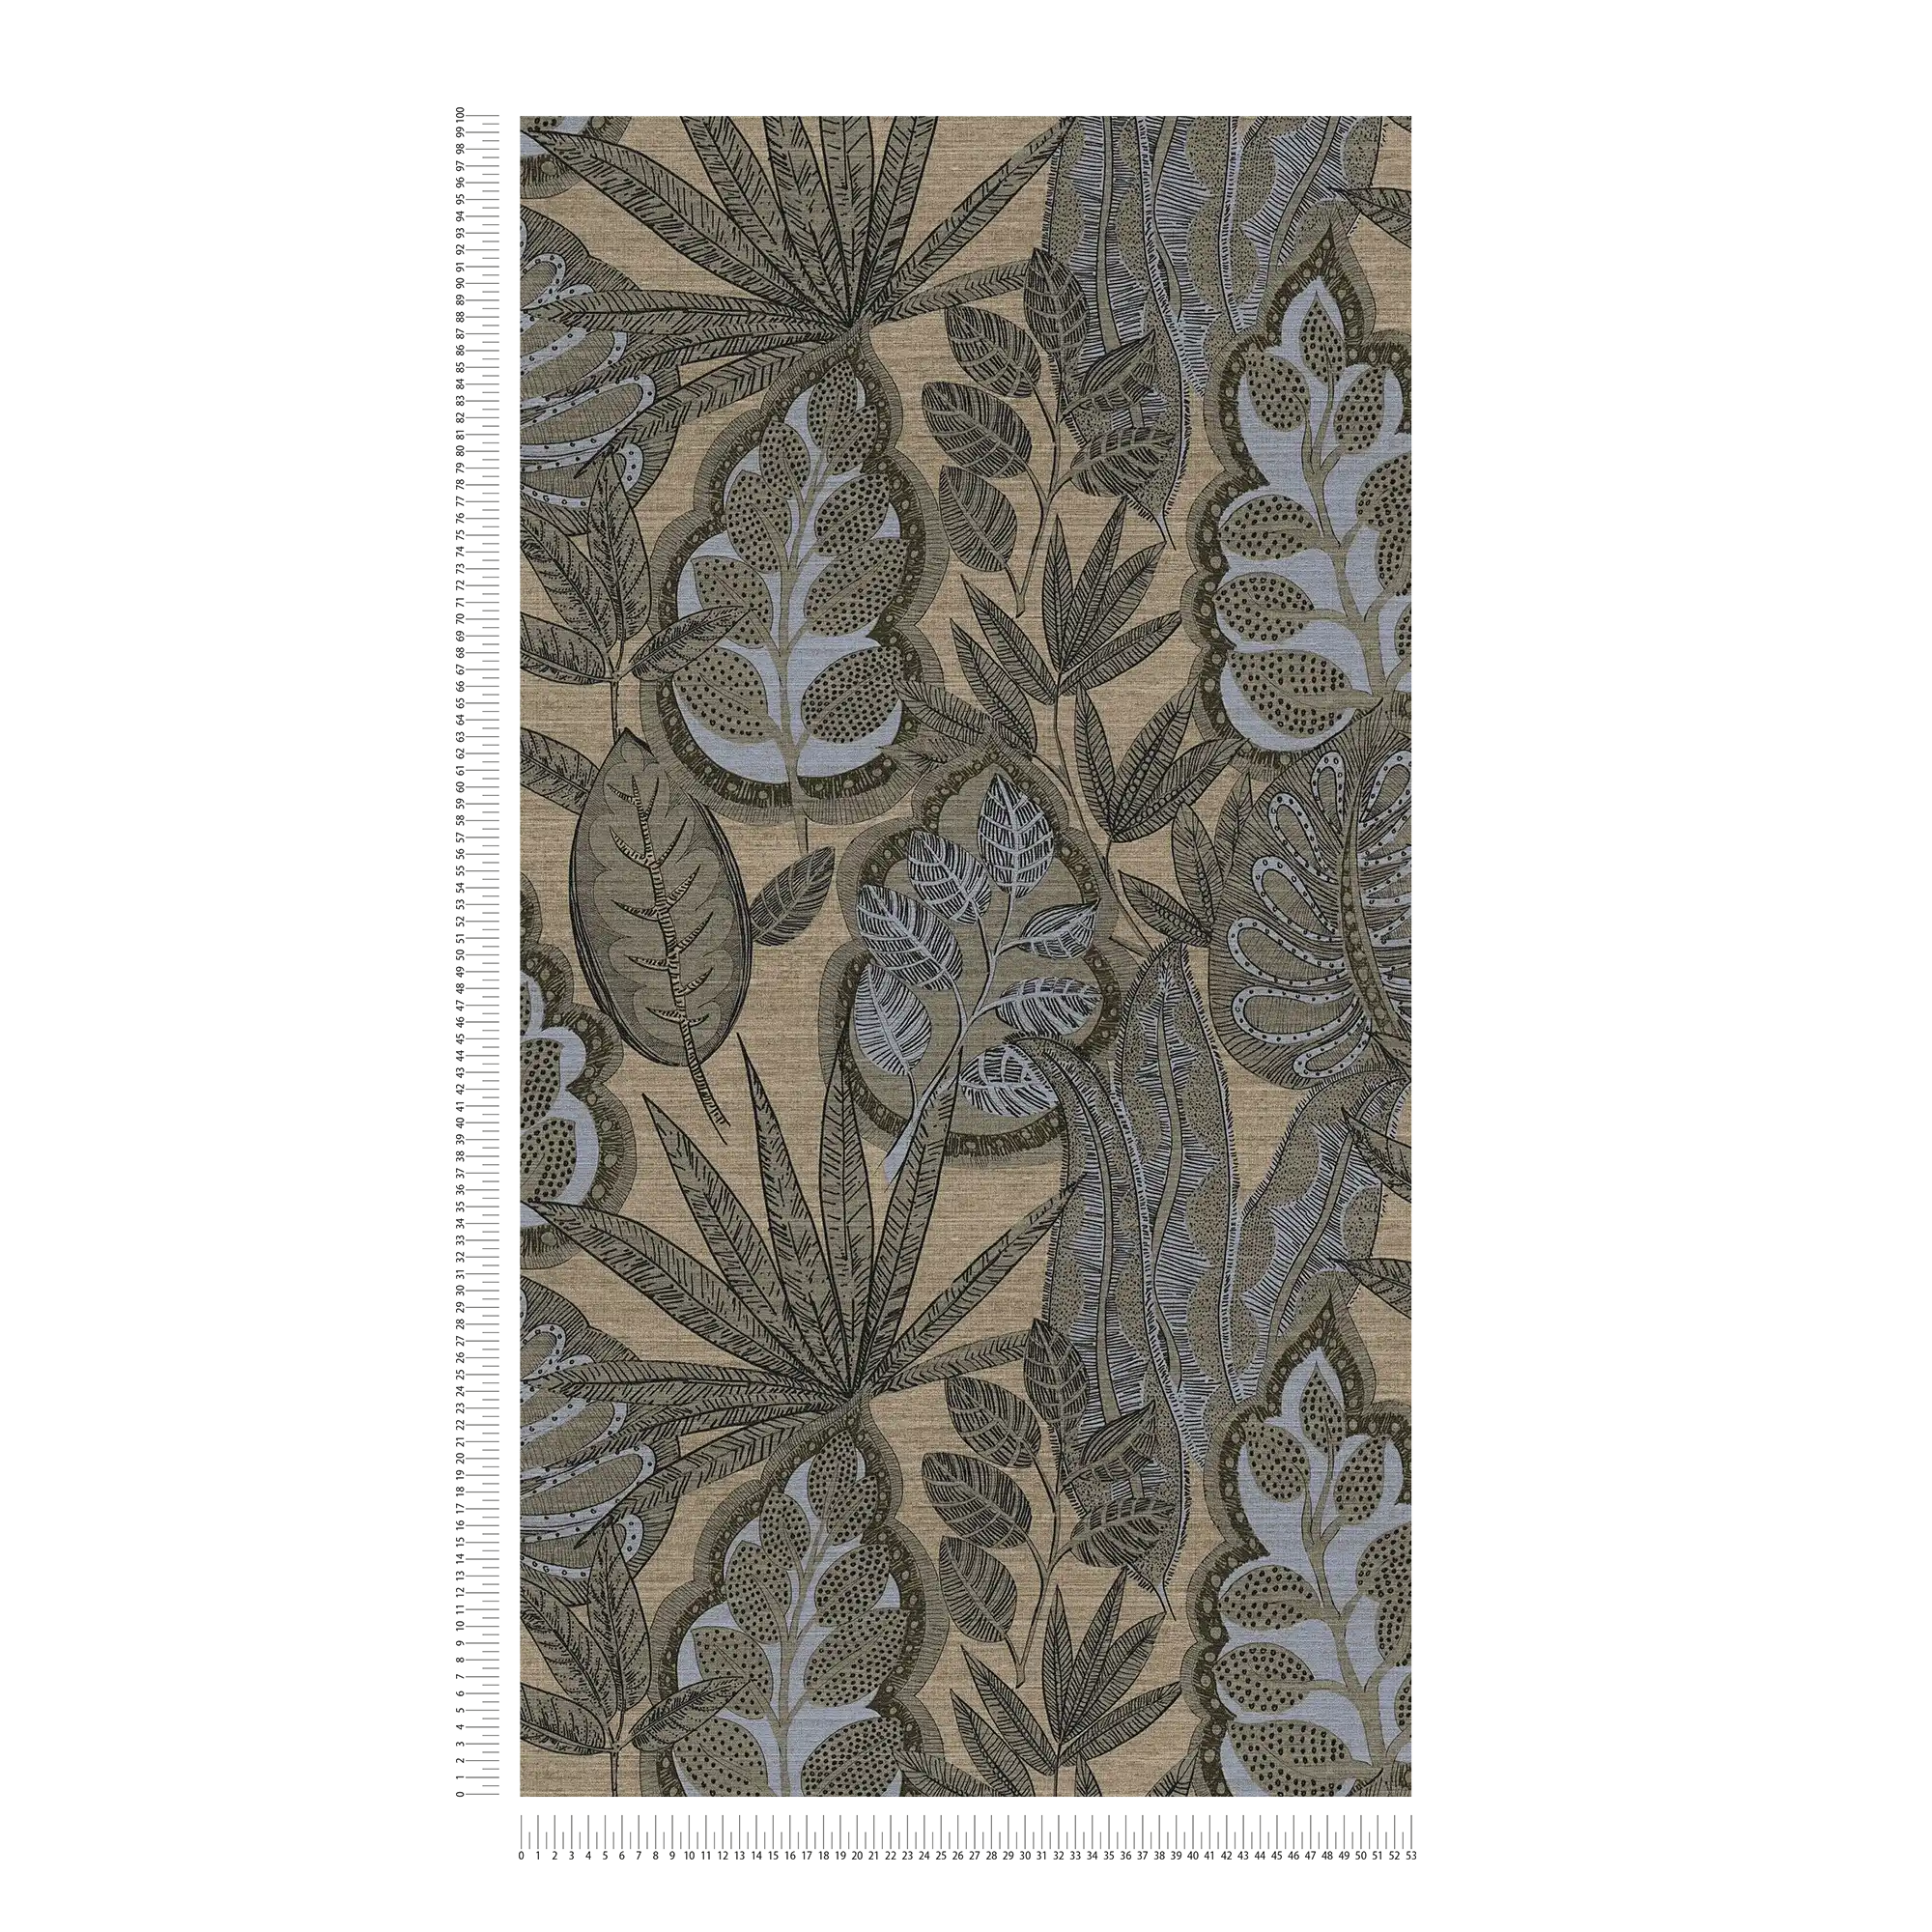             Floral non-woven wallpaper in graphic design with light structure, matt - grey, beige, brown
        